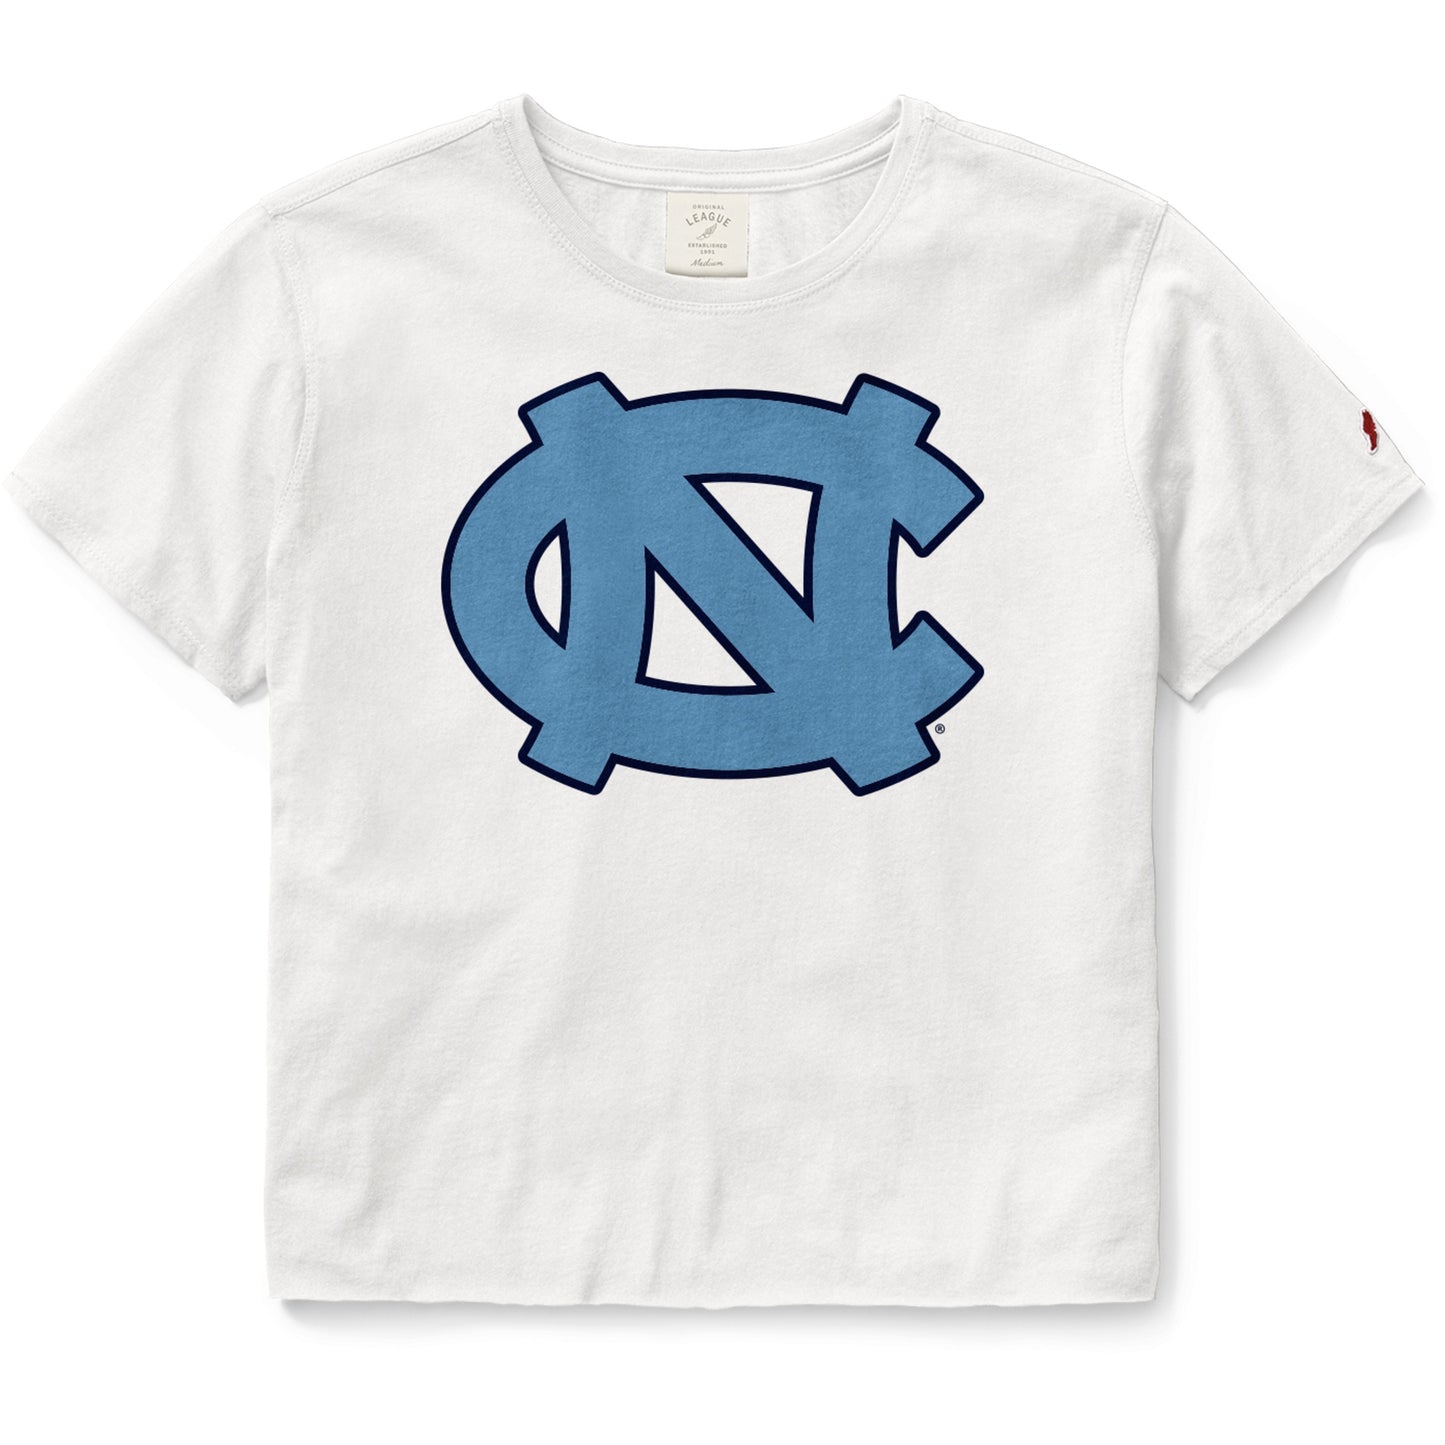 UNC Game Day Crop Top in White by League